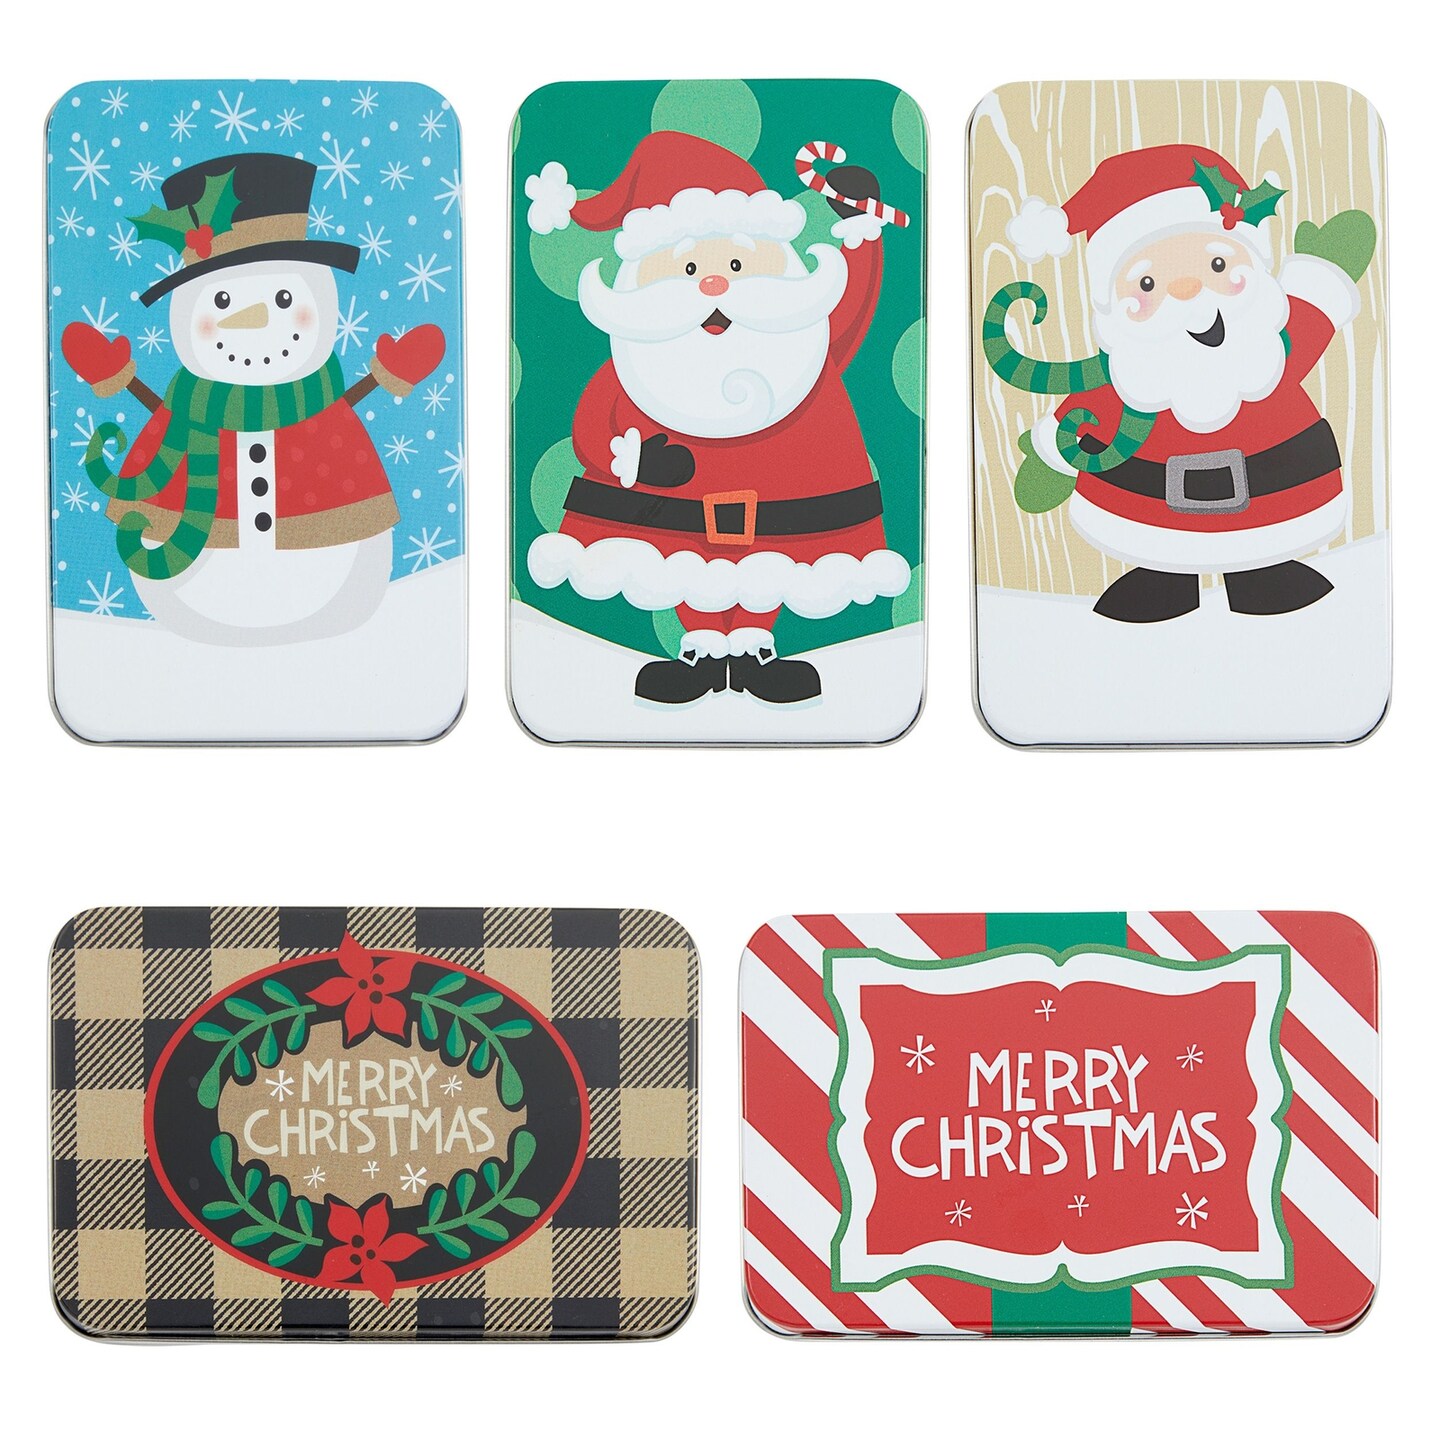 Unique Gifts, Stocking Stuffers + Greeting Cards